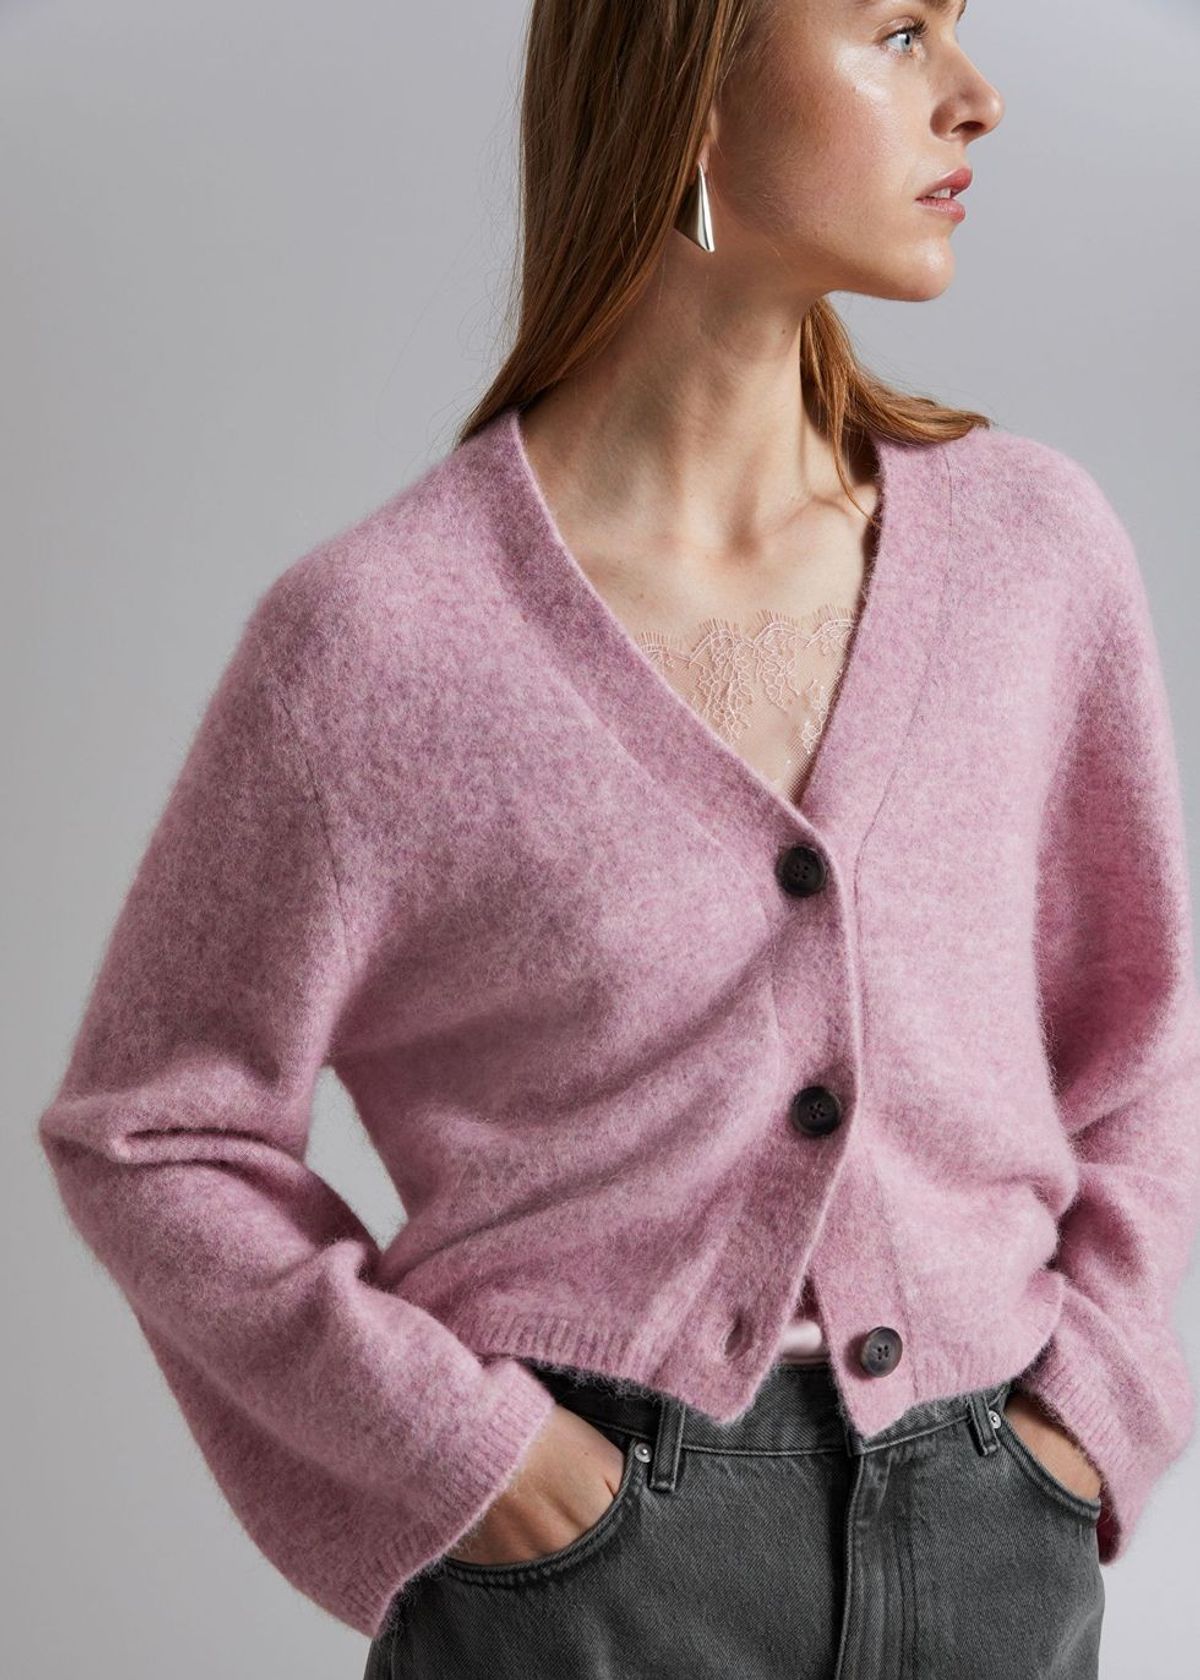 Sweater Weather Is Here! Shop The Coziest Styles Of The Season